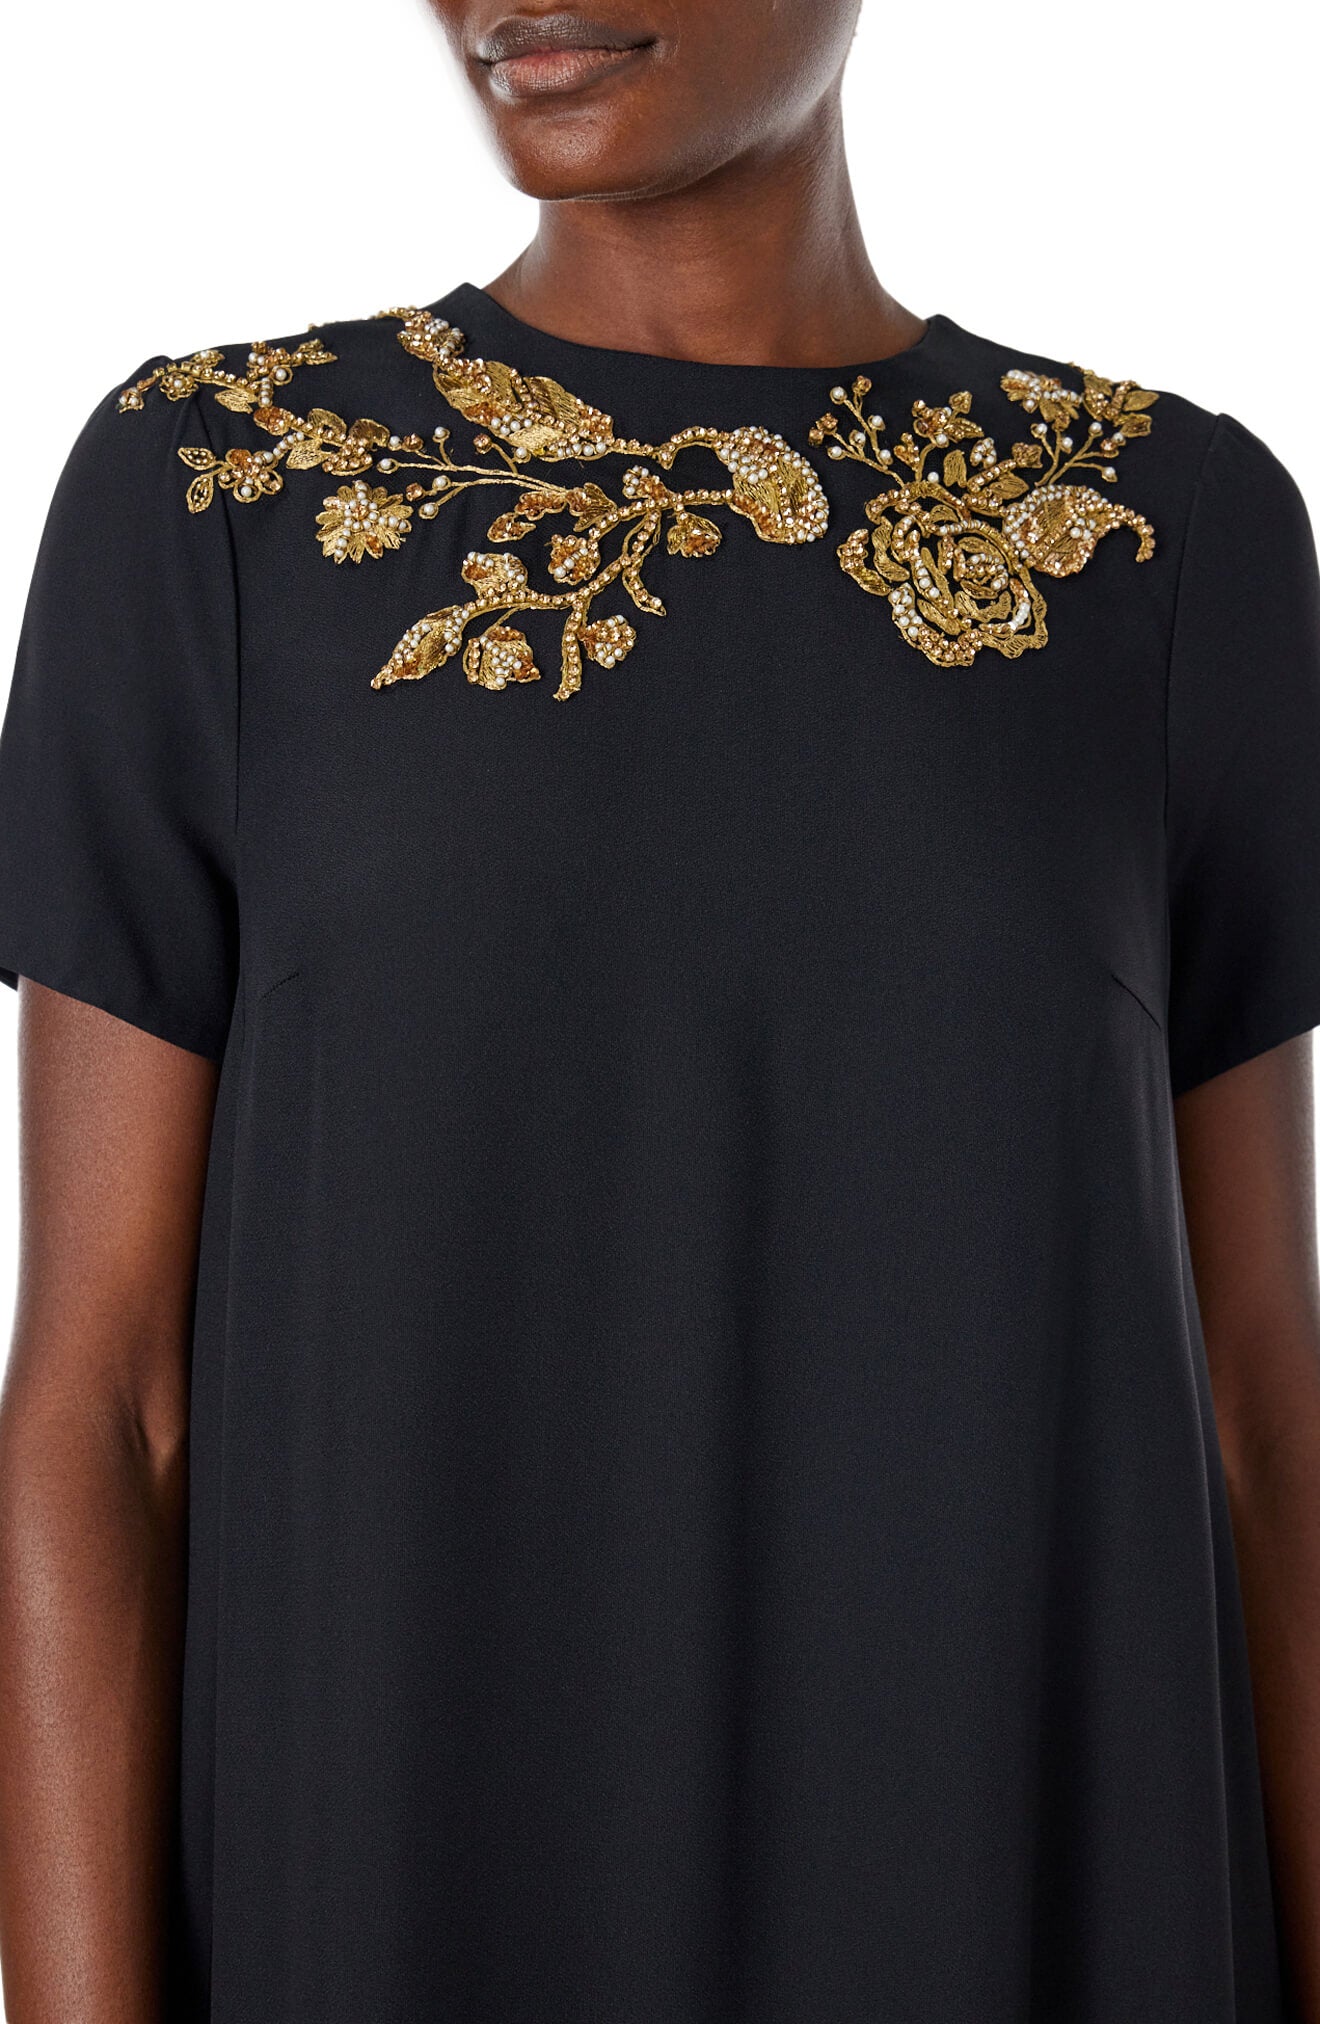 Monique Lhuillier black jewel neck, short sleeve caftan with gold embroidery.